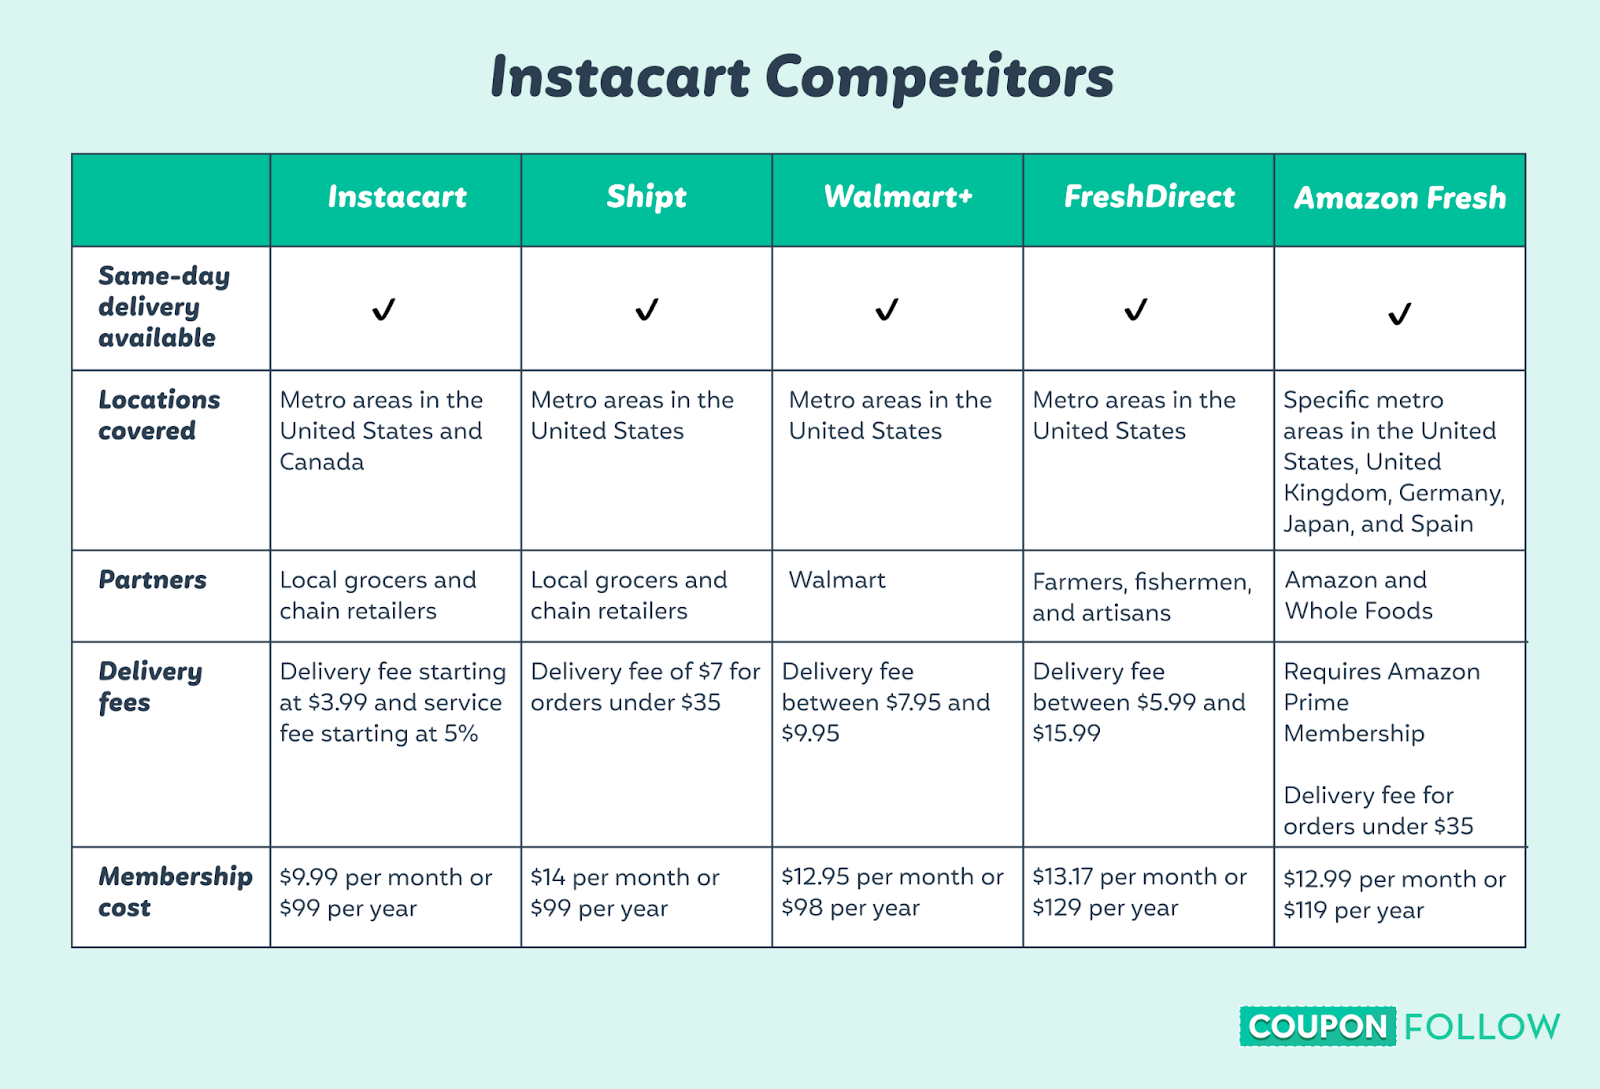 Table illustration showing how Instacart compares to its alternatives